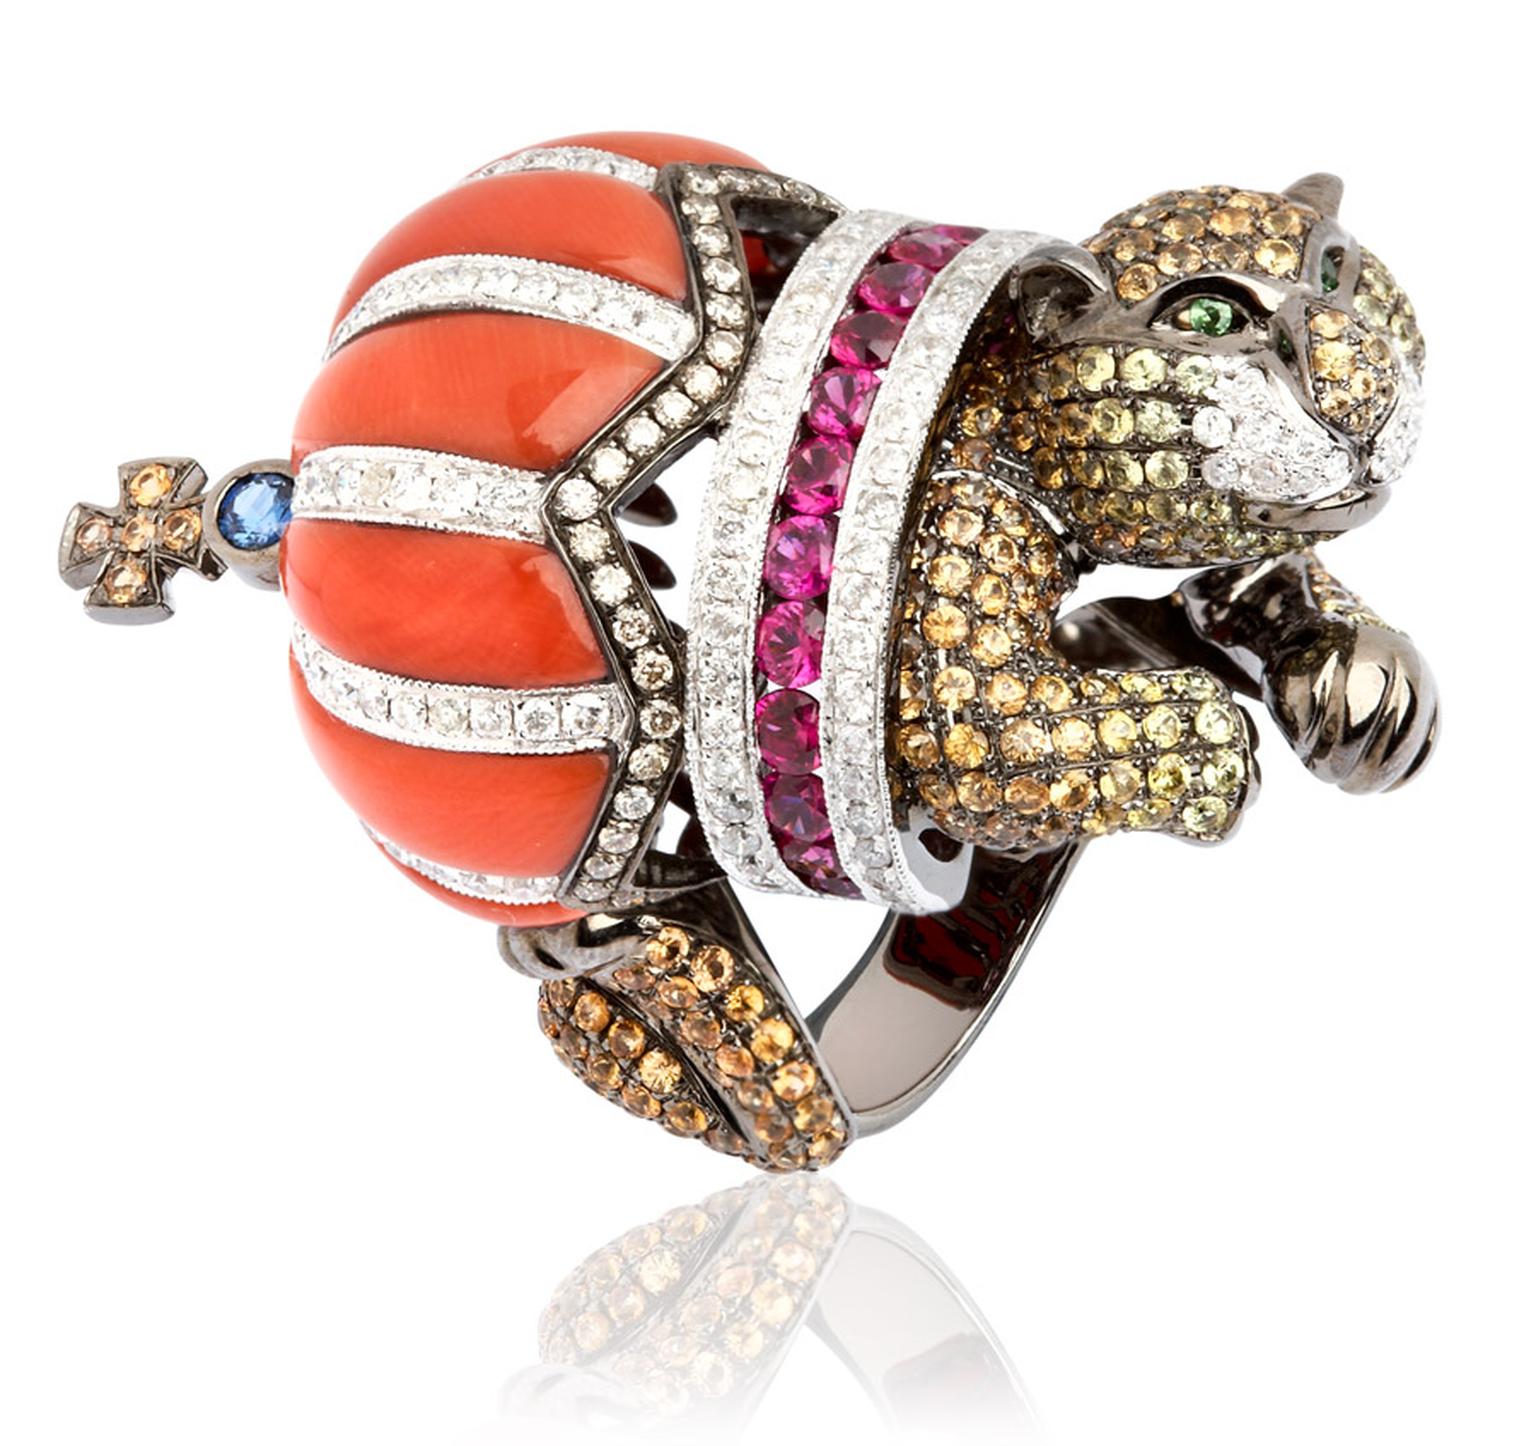 Wendy-Yue-Fantasie-Jubilee-18ct-yellow-gold,-diamond,-sapphire,-garnet-and-ruby-Lion-ring-by-Wendy-Yue-for-Annoushka_01.jpg